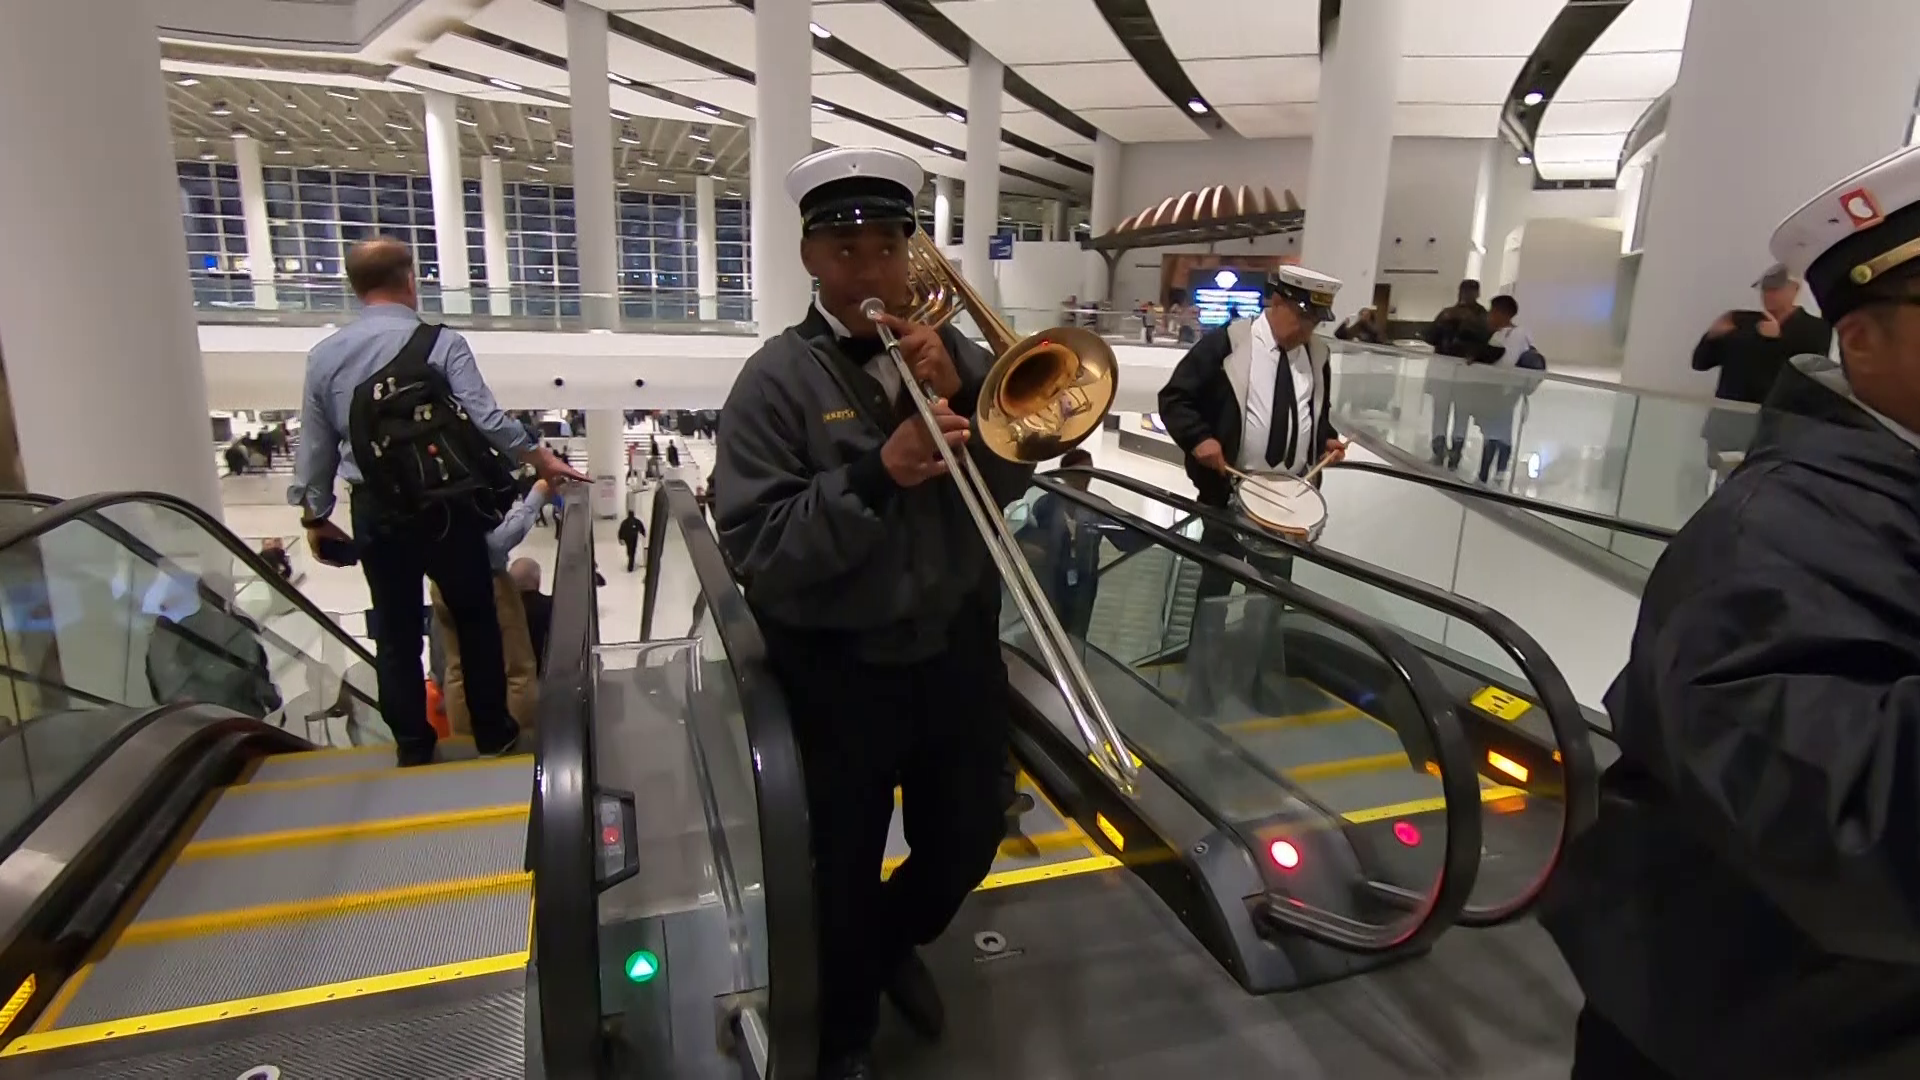 The grand opening of the new MSY terminal would not be complete without a New Orleans brass band.